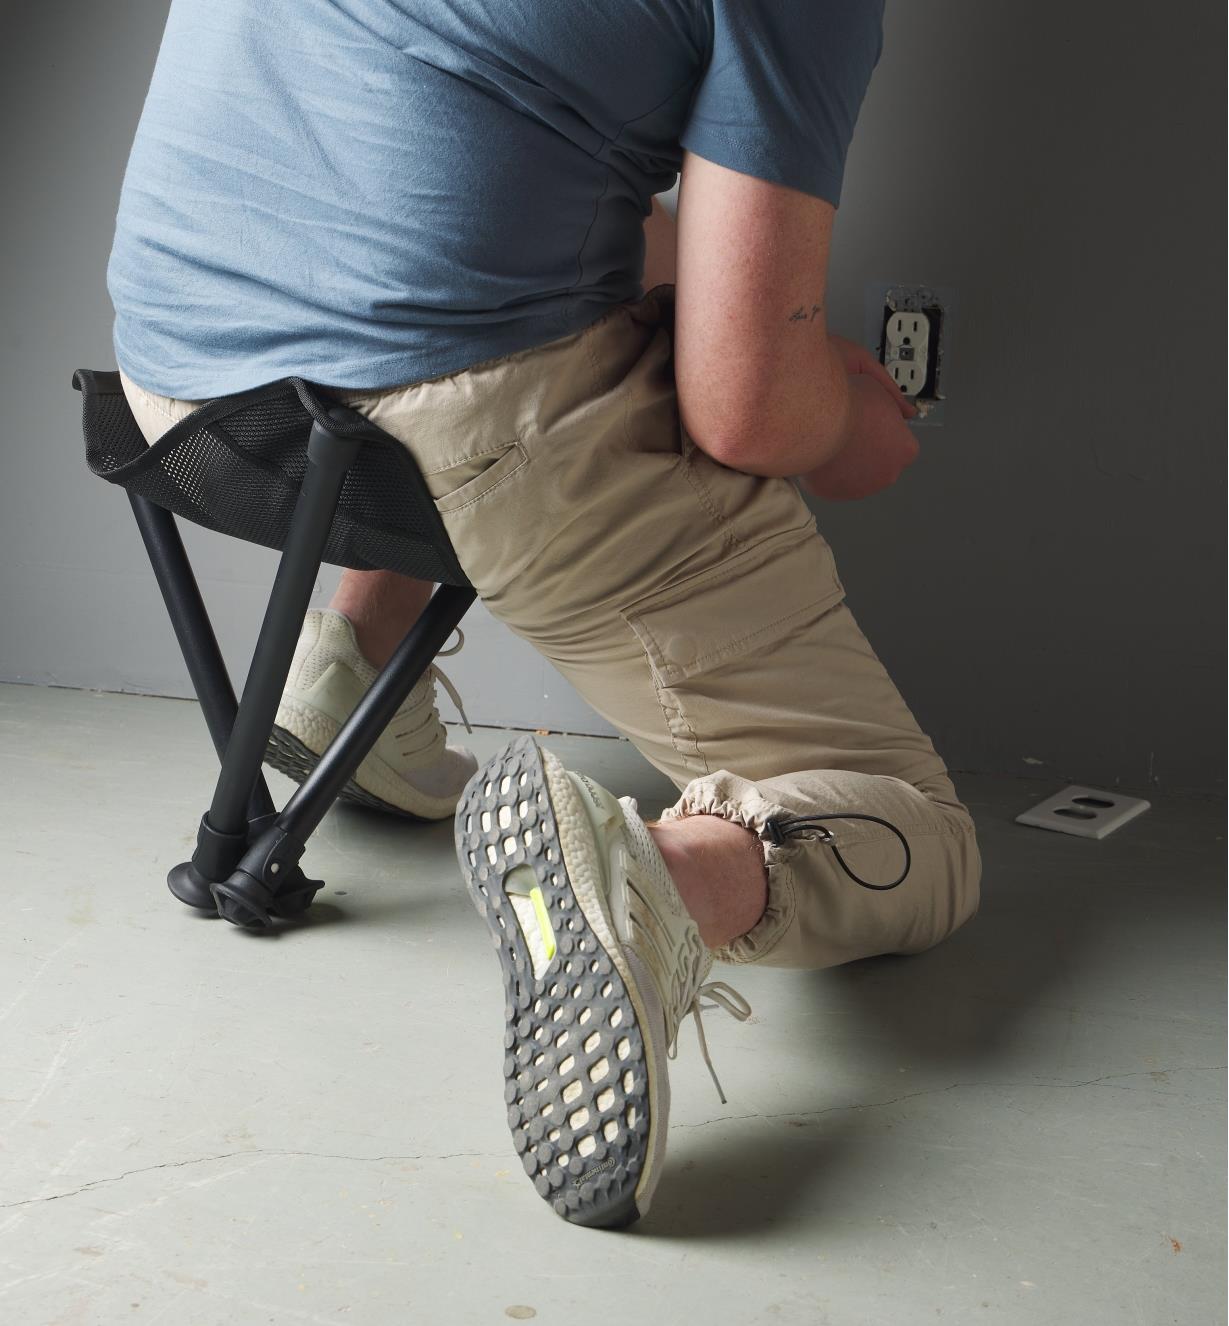 A man seated on a Walkstool doing electrical work